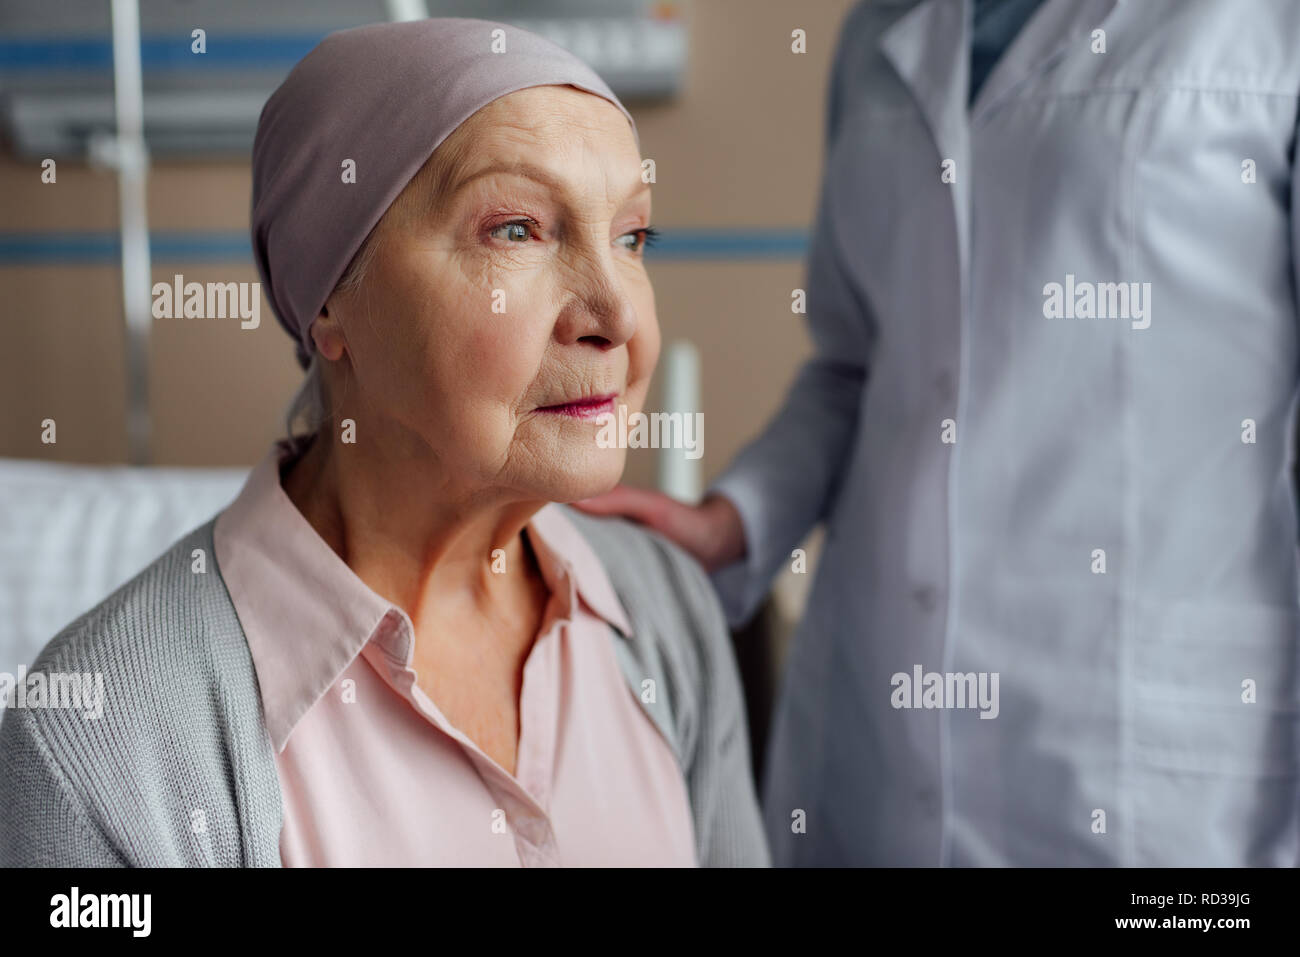 doctor consoling upset senior woman with cancer in hospital Stock Photo